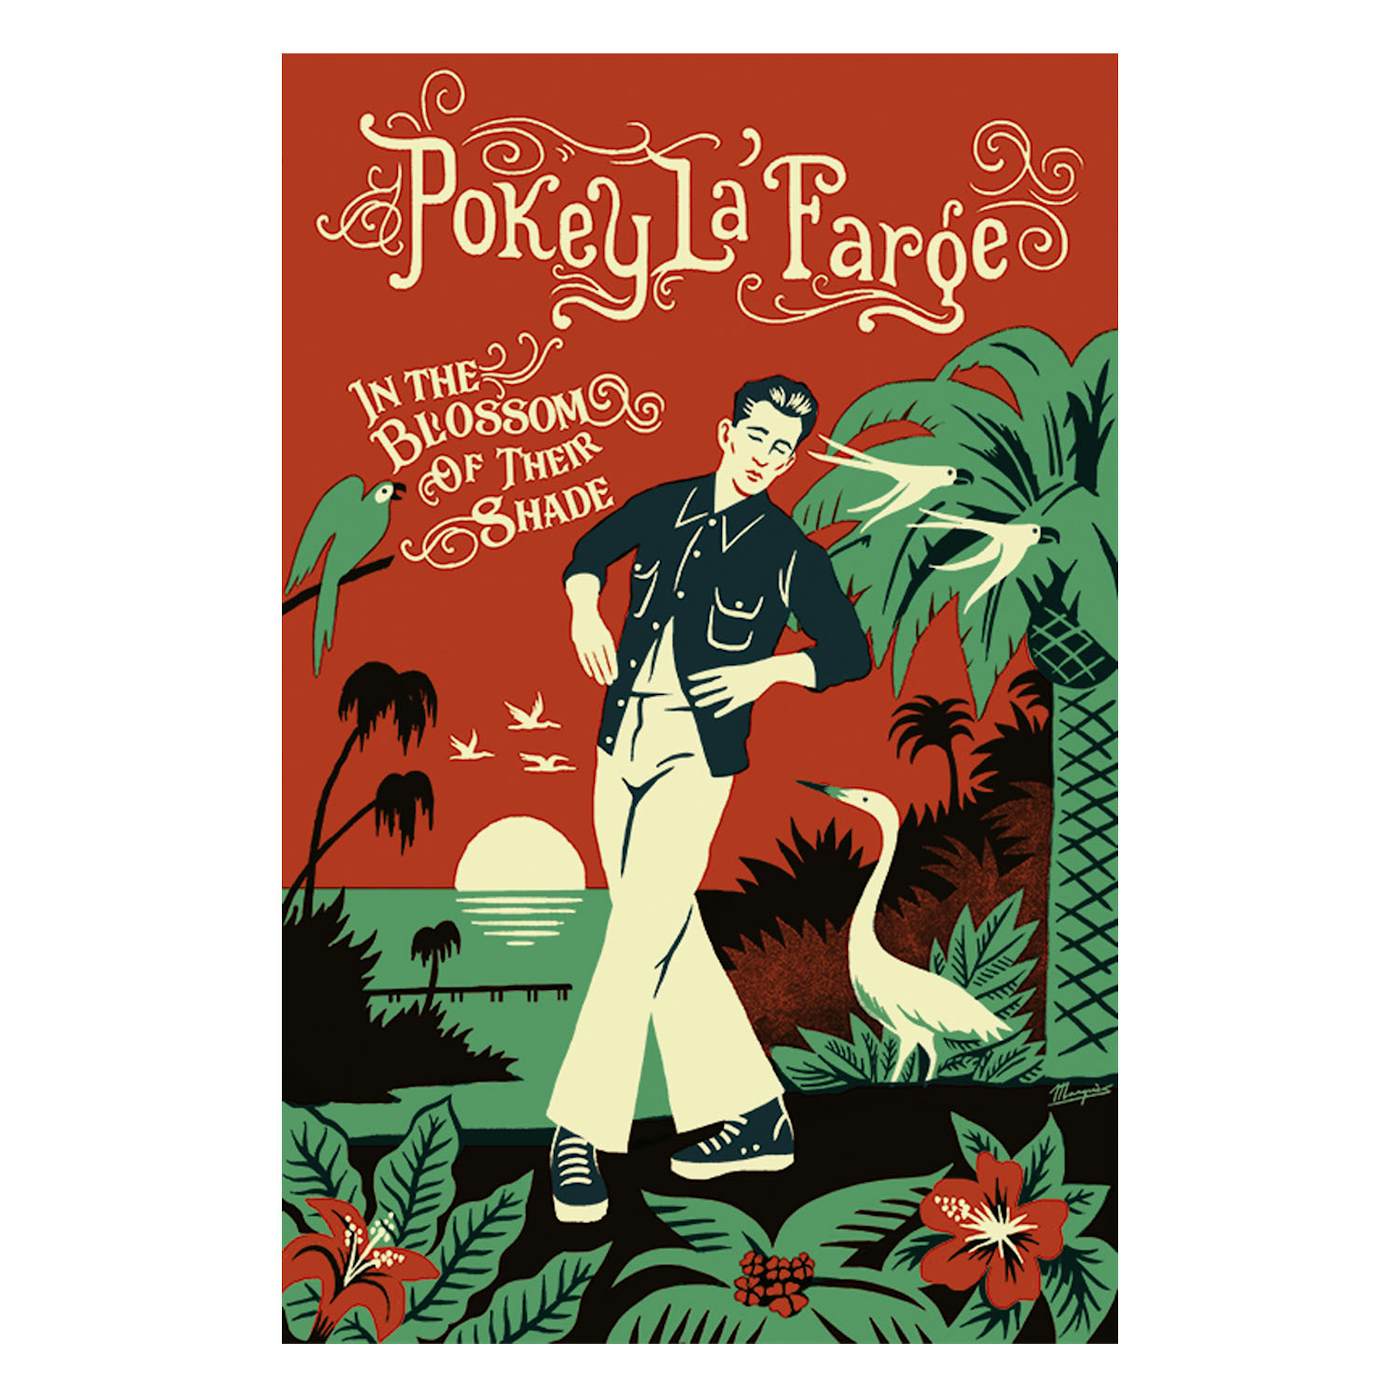 Pokey LaFarge "In the Blossom of Their Shade" Poster